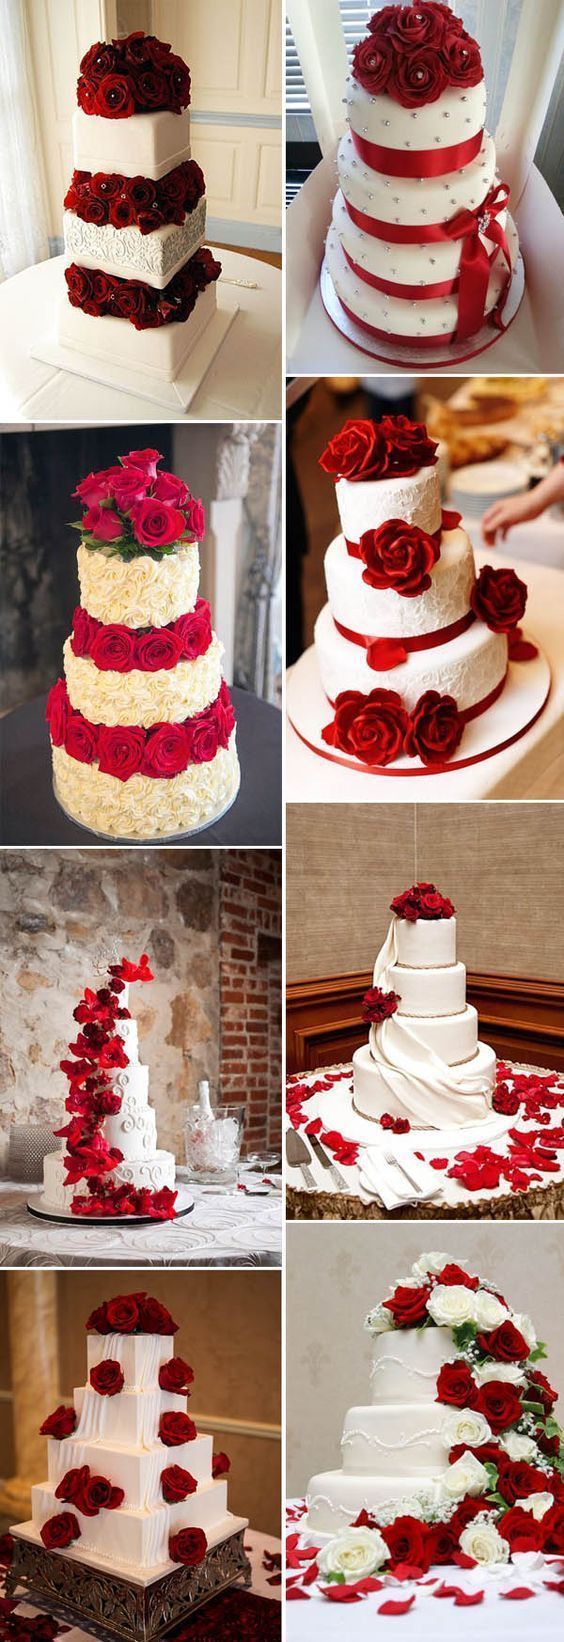 40 Inspirational Classic Red and White Wedding Ideas -   16 wedding Cakes red ideas